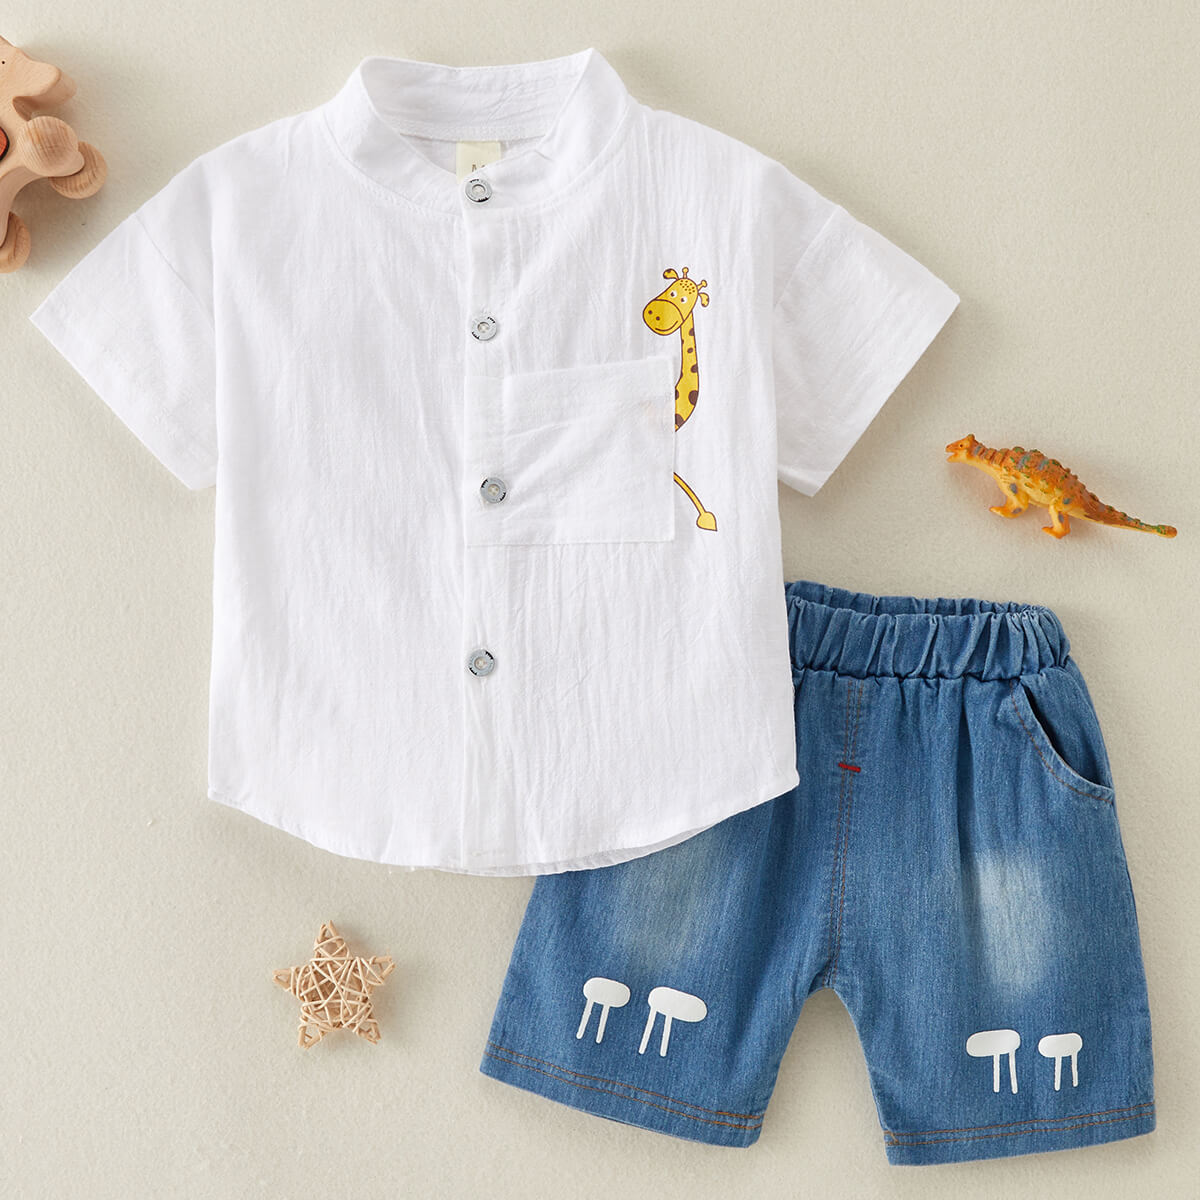 Details about   2-piece Deer Pattern Shirt & Short Jeans for Toddler Boy No Shoes 